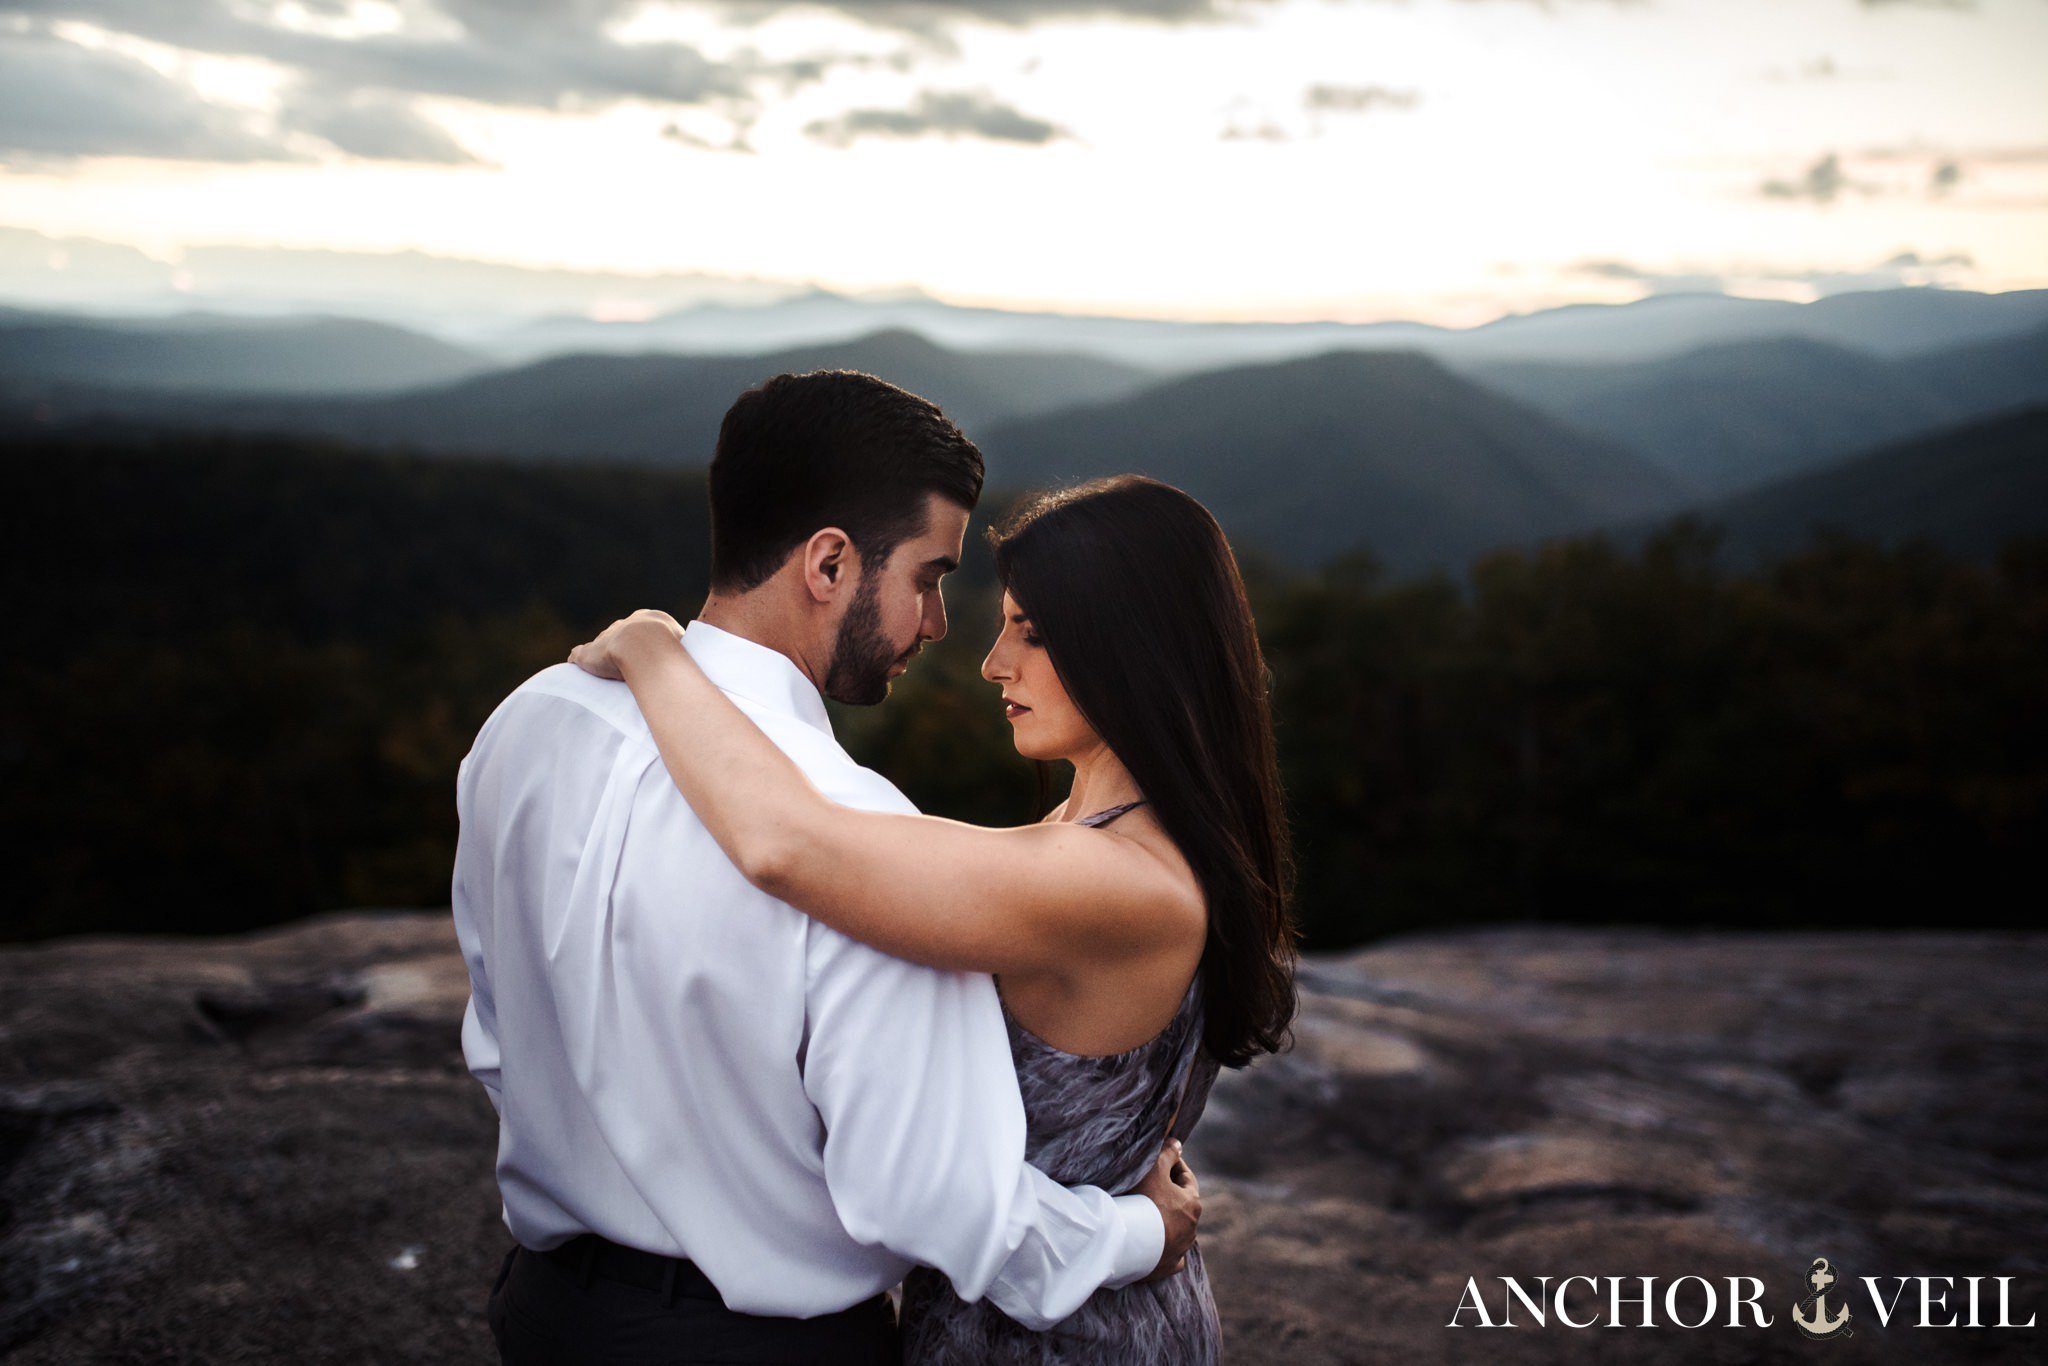 her arm around him during the Stone Mountain Engagement Session